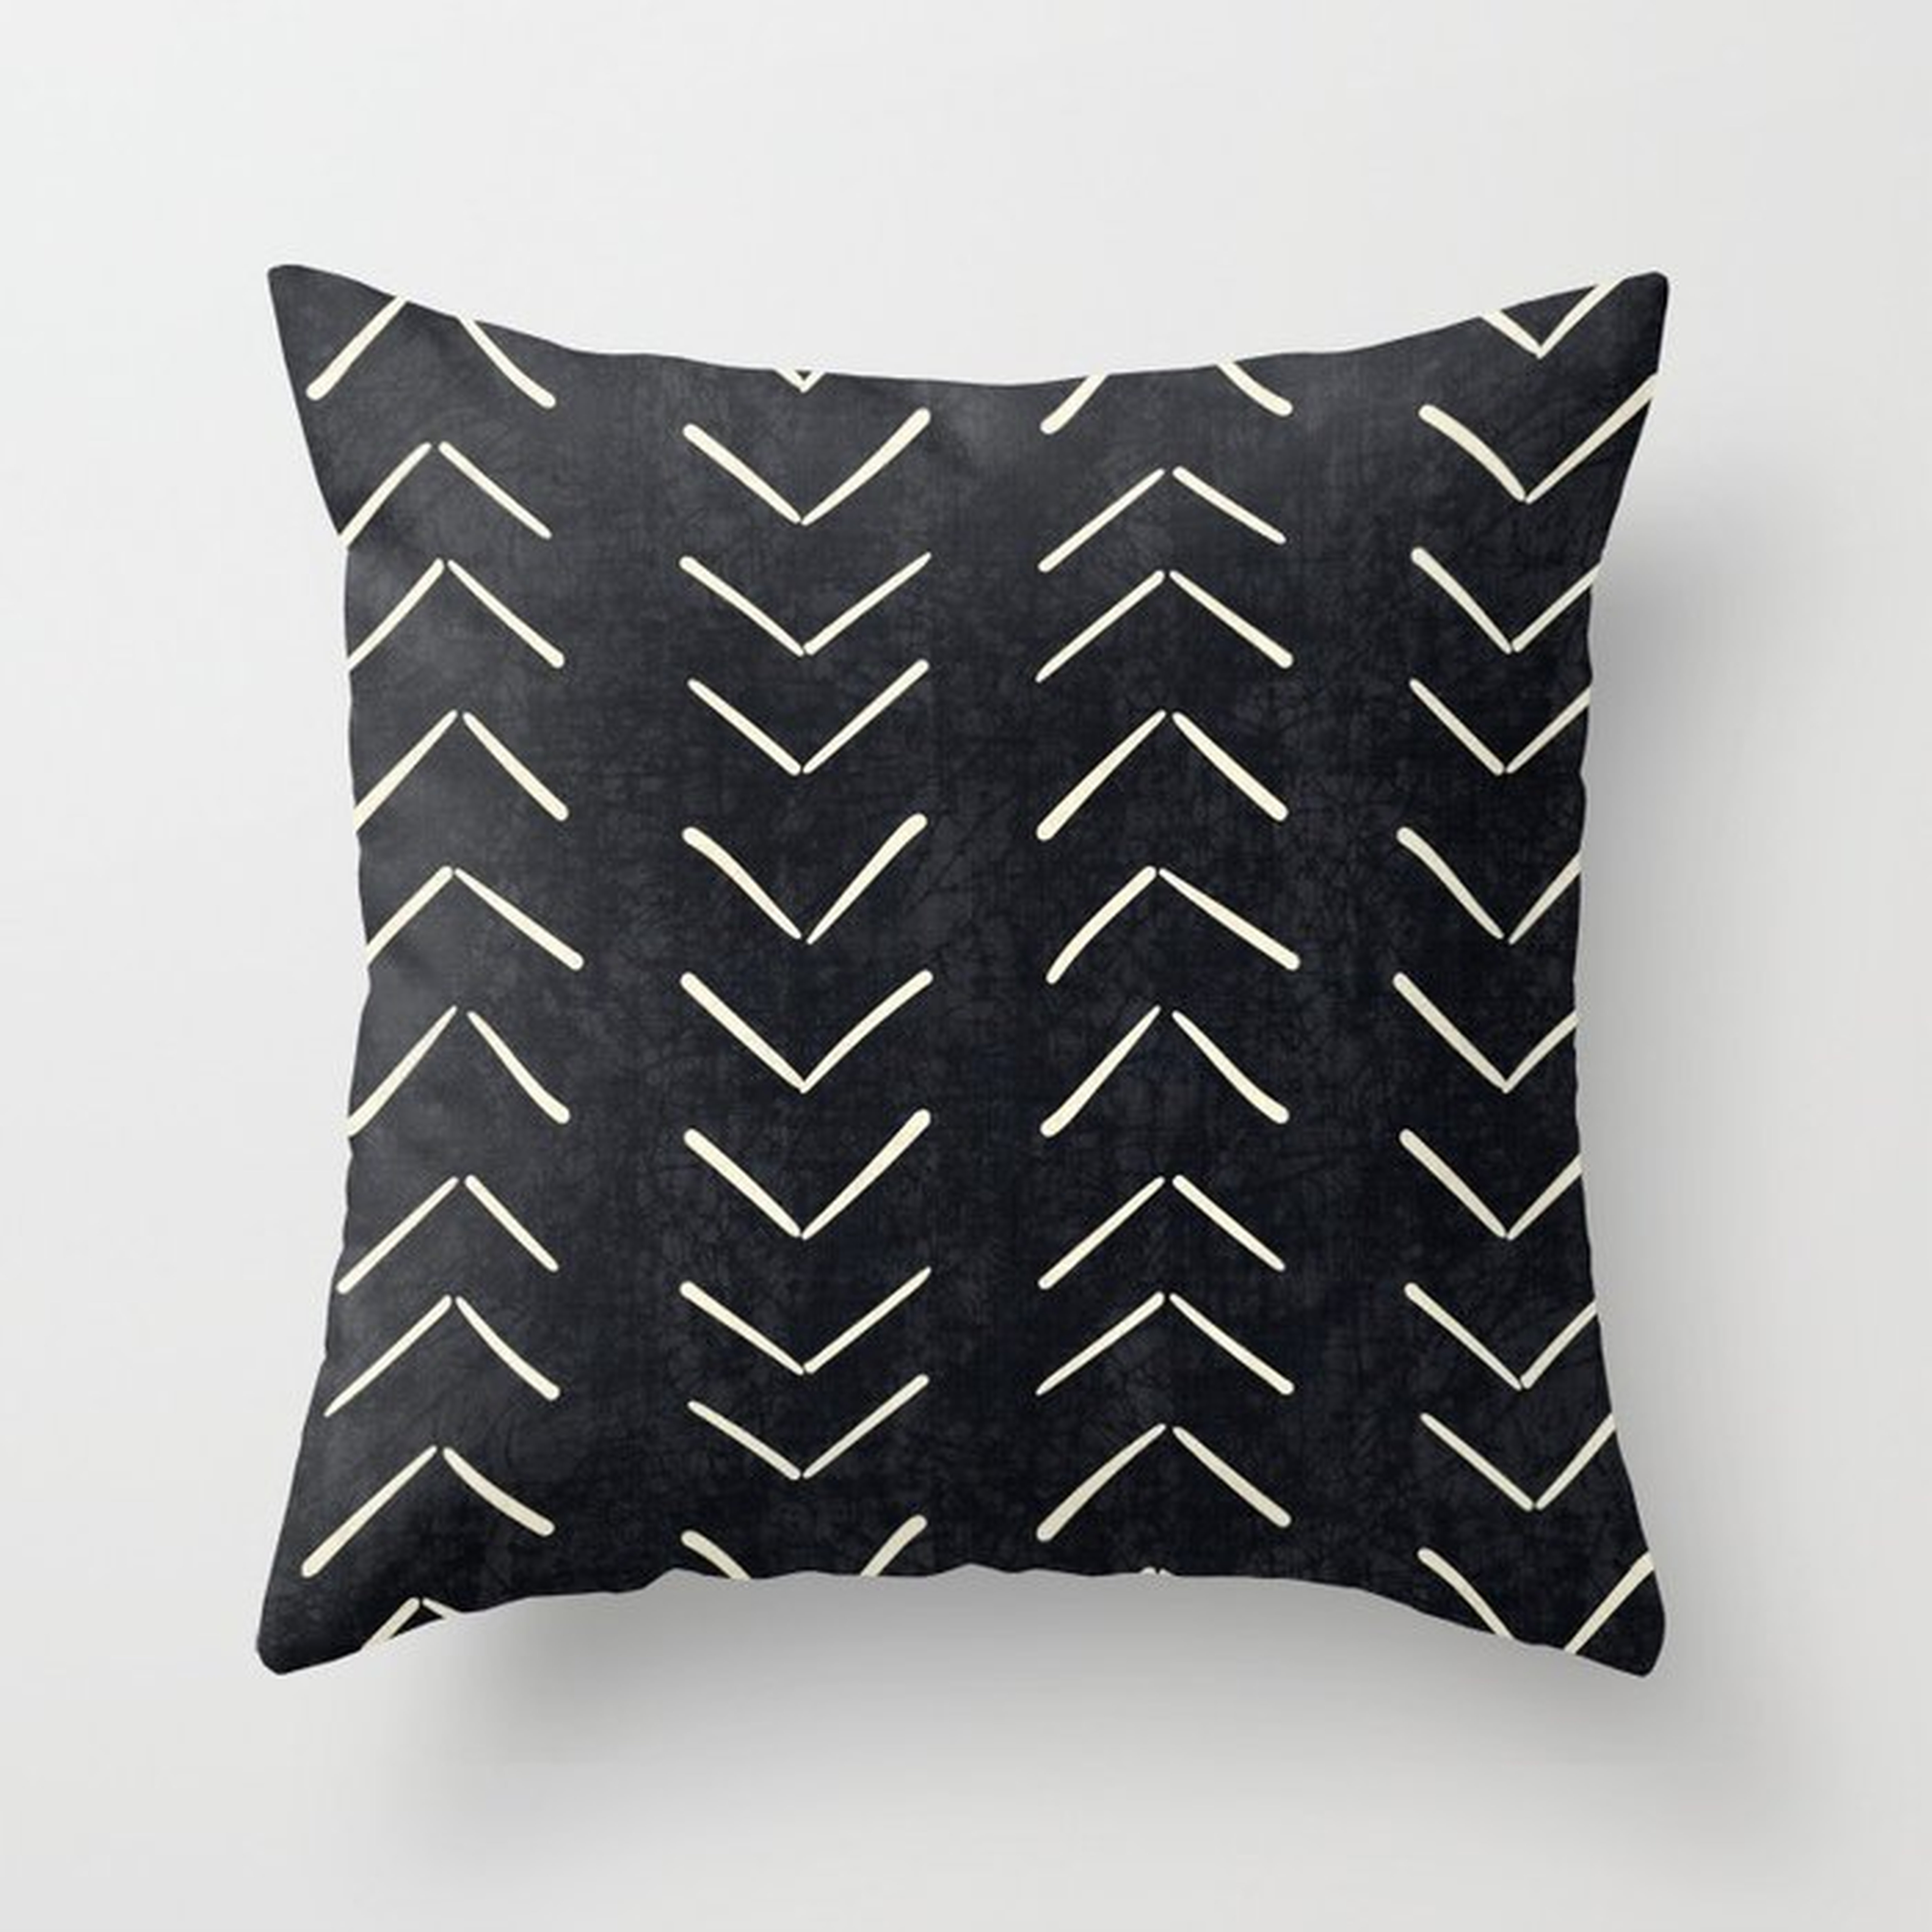 Mudcloth Big Arrows in Black and White Throw Pillow 18x18 w/insert - Society6